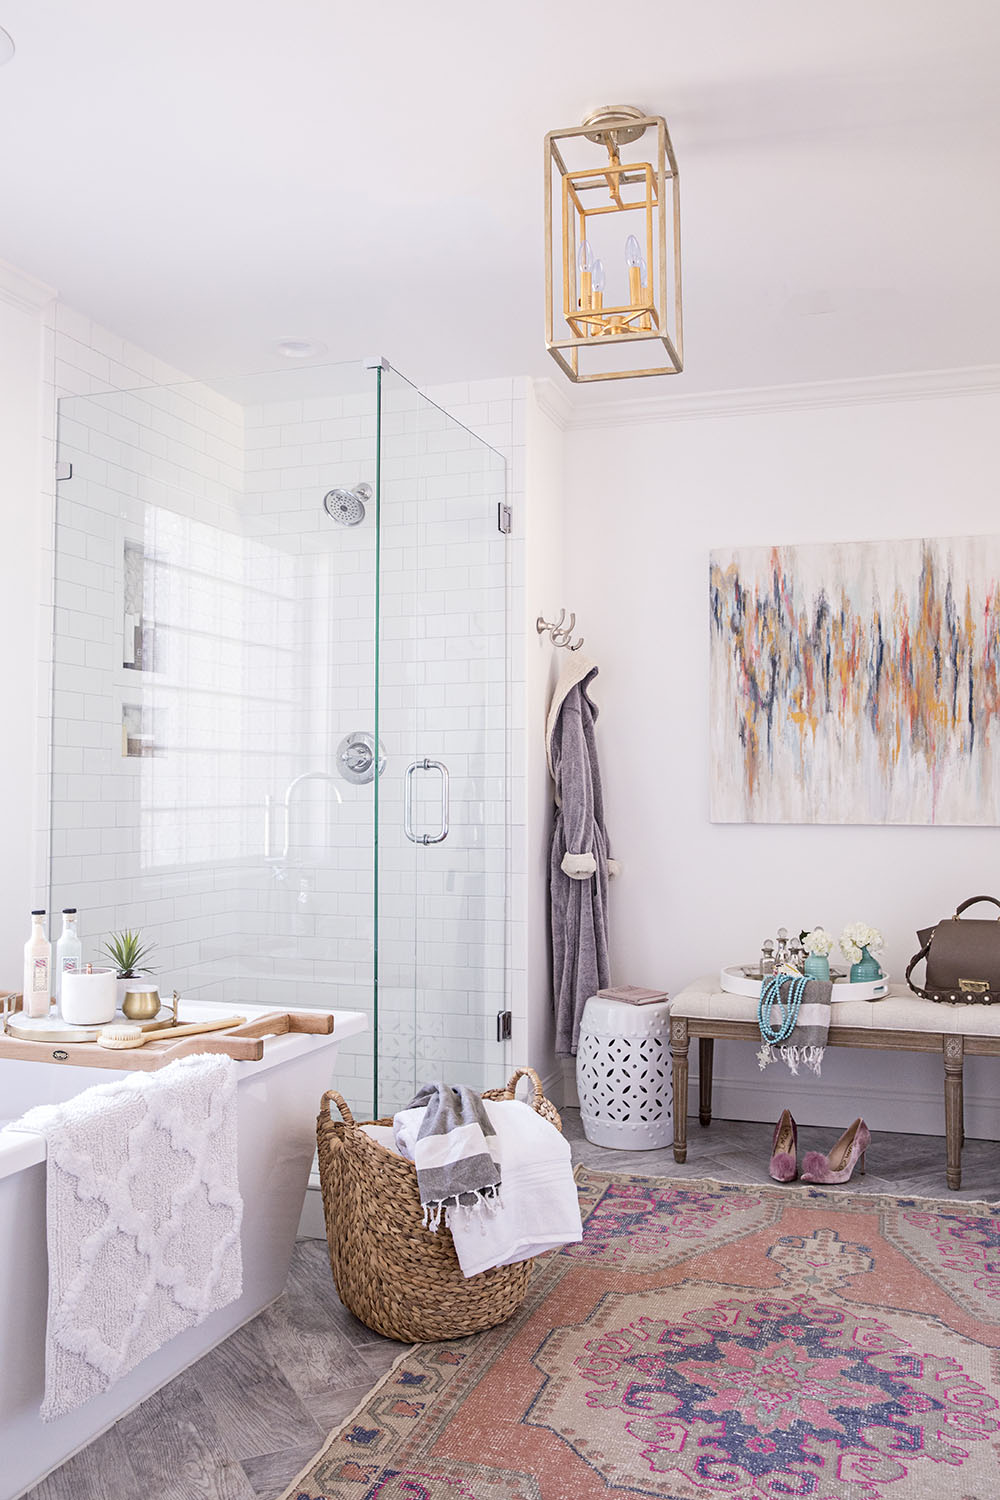 A master bathroom decorated with a large rug, artwork, and gold light fixture.